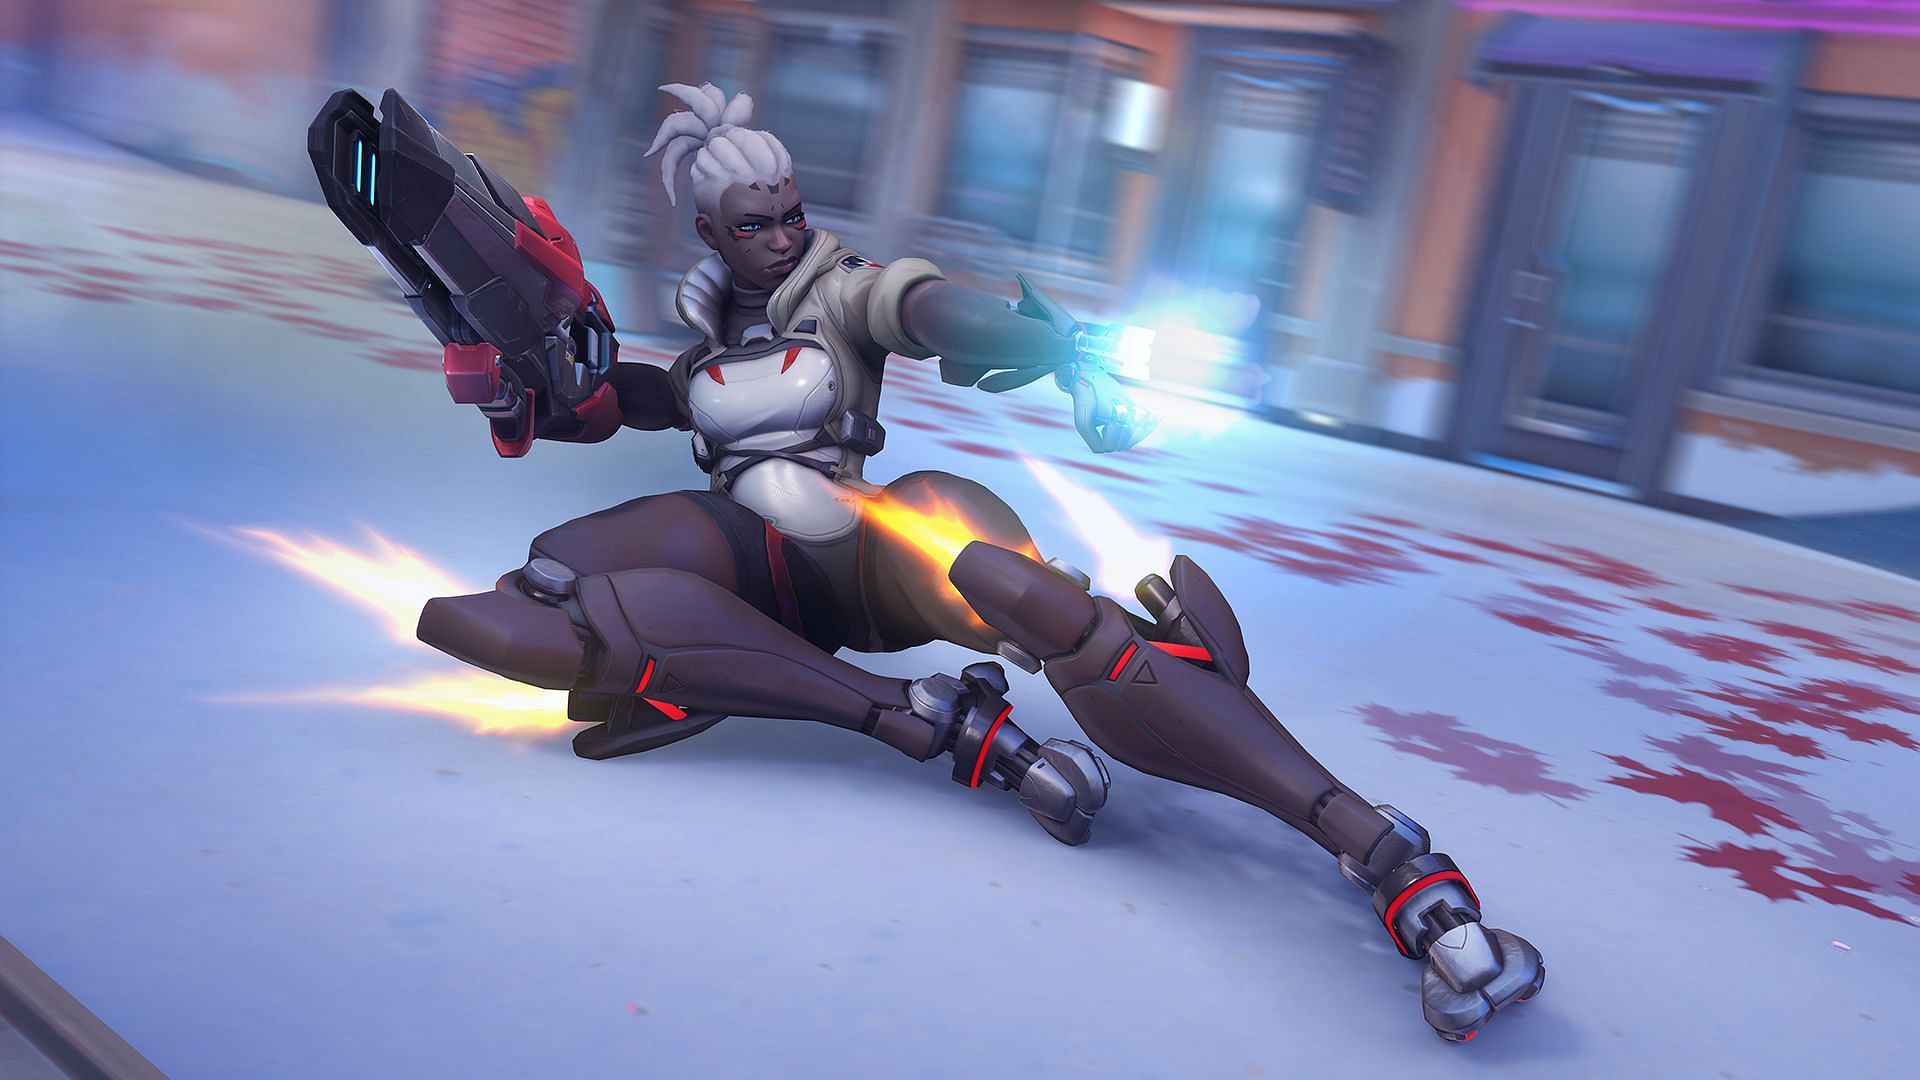 Sojourn is the newest Overwatch character (Image via Blizzard)